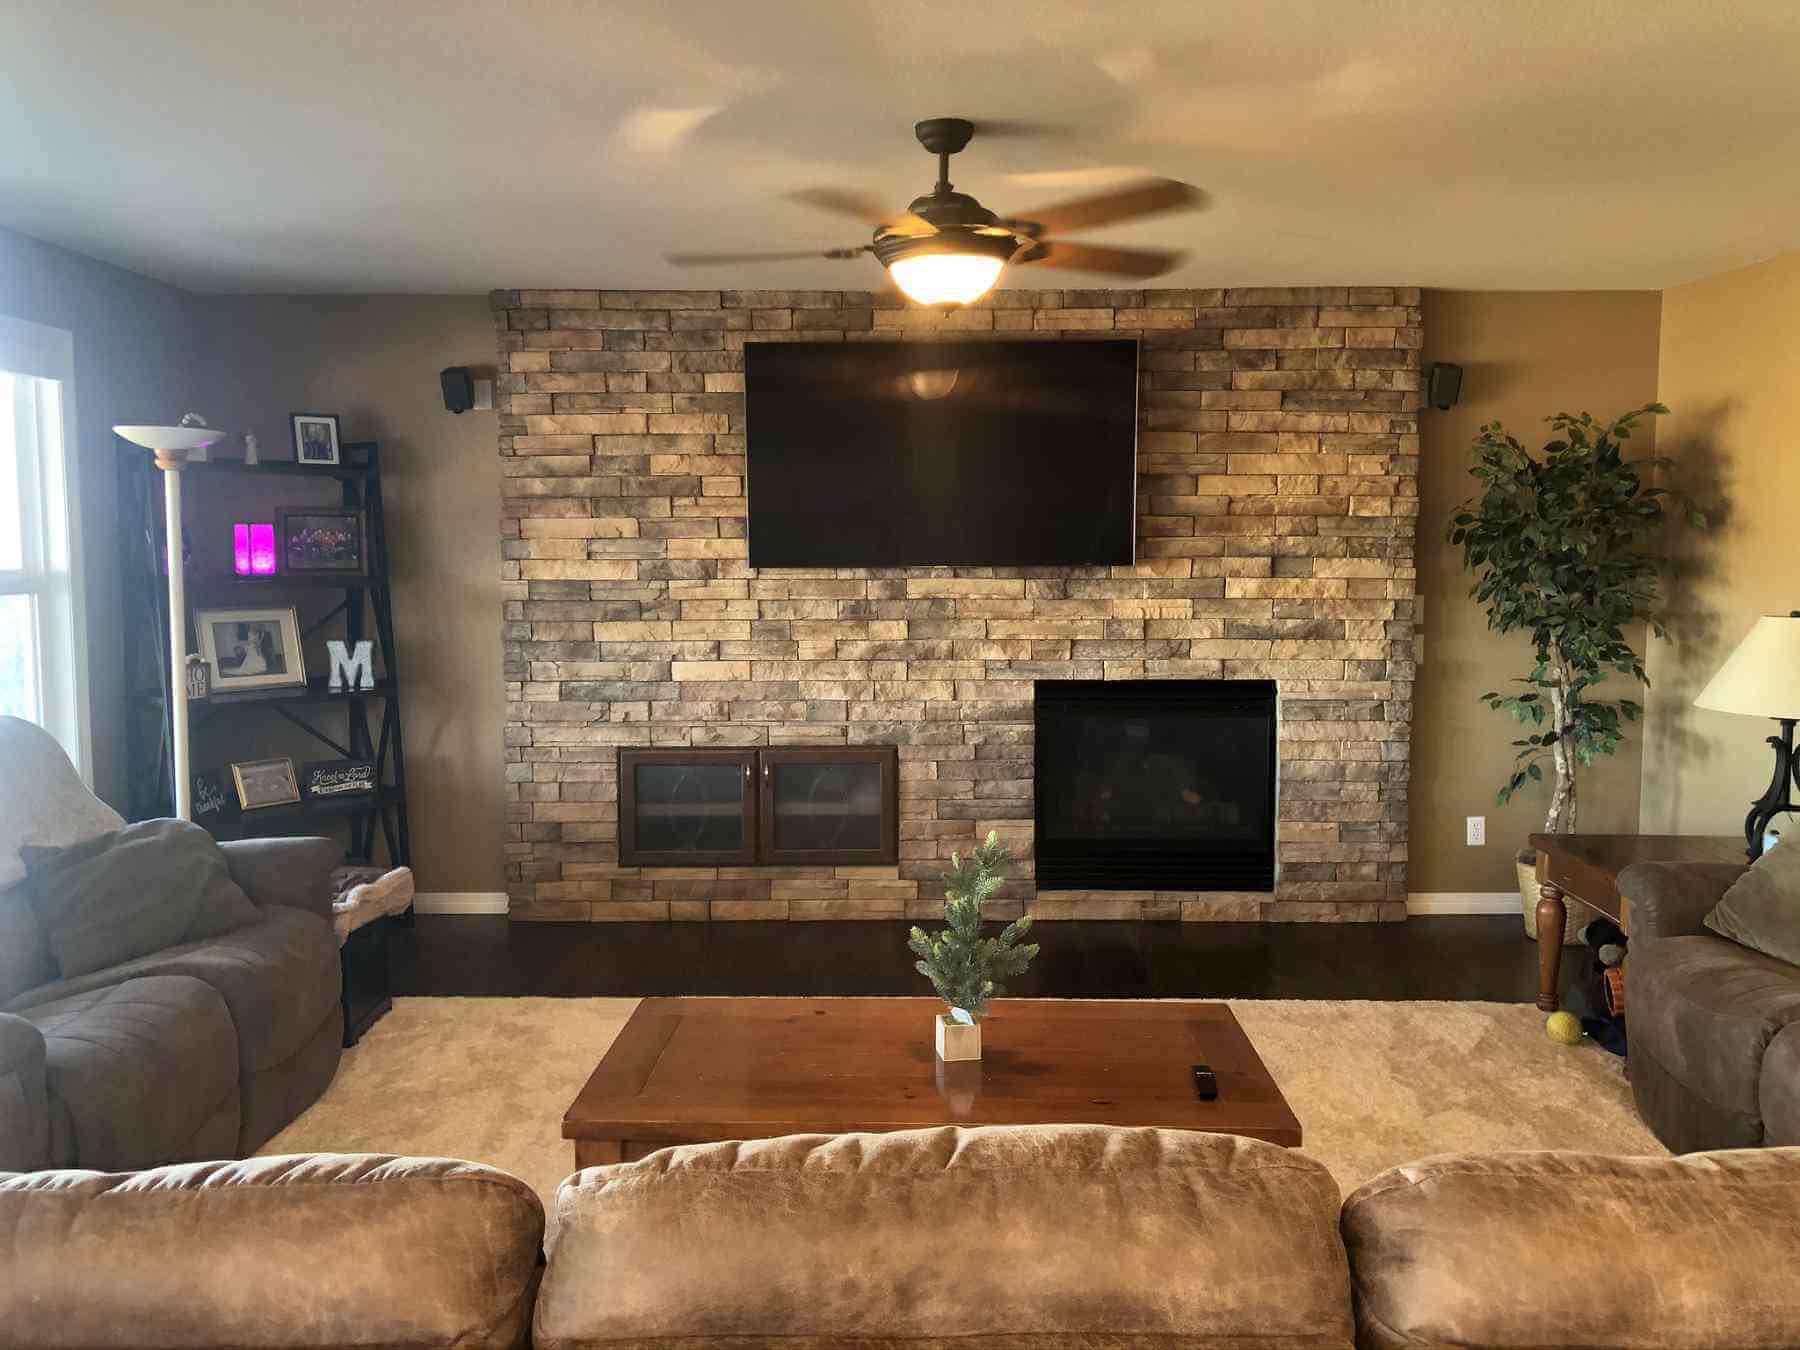 The Fireplace Wall